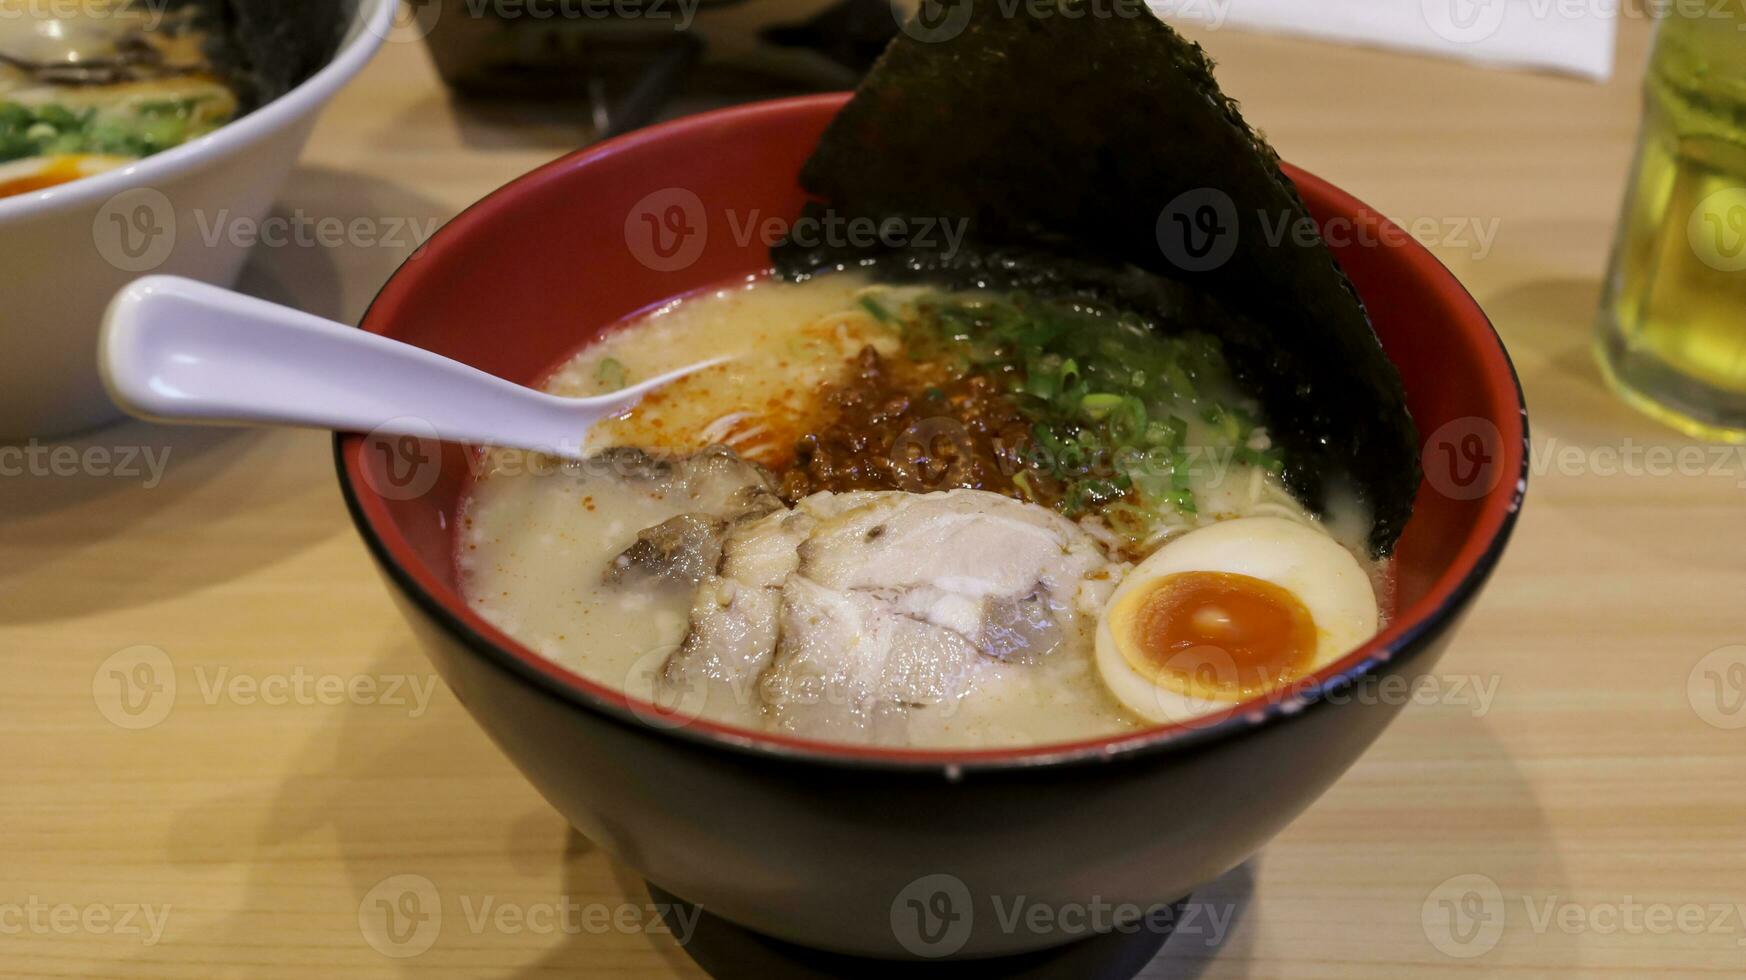 Modern style ramen with tonkotsu broth served with thin noodle, pork belly, and spring onions, special spicy miso with ground pork and fragrant garlic oil add kick to tenses. photo